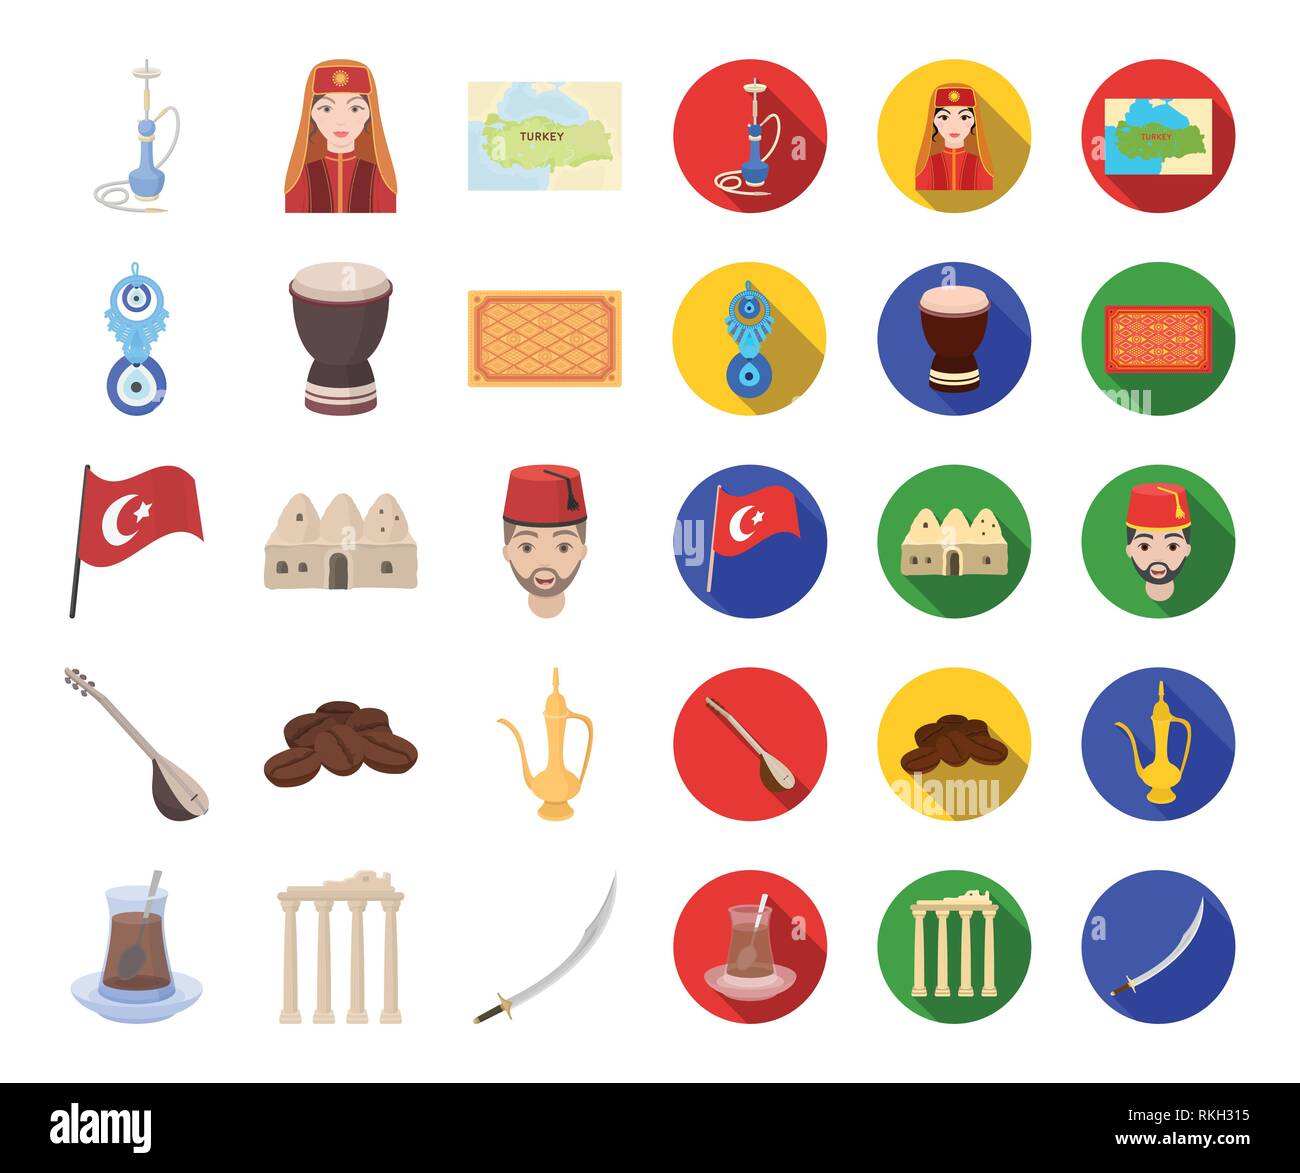 amulet,art,attraction,beans,beehive,carpet,cartoon,flat,coffee,collection,country,culture,design,drum,fez,flag,goblet,hookah,house,icon,illustration,isolated,journey,jug,kilij,logo,man,nazar,population,ruins,saz,set,showplace,sight,sign,symbol,tea,territory,tourism,traditions,traveling,turkey,turkish,vector,web,woman Vector Vectors , Stock Vector